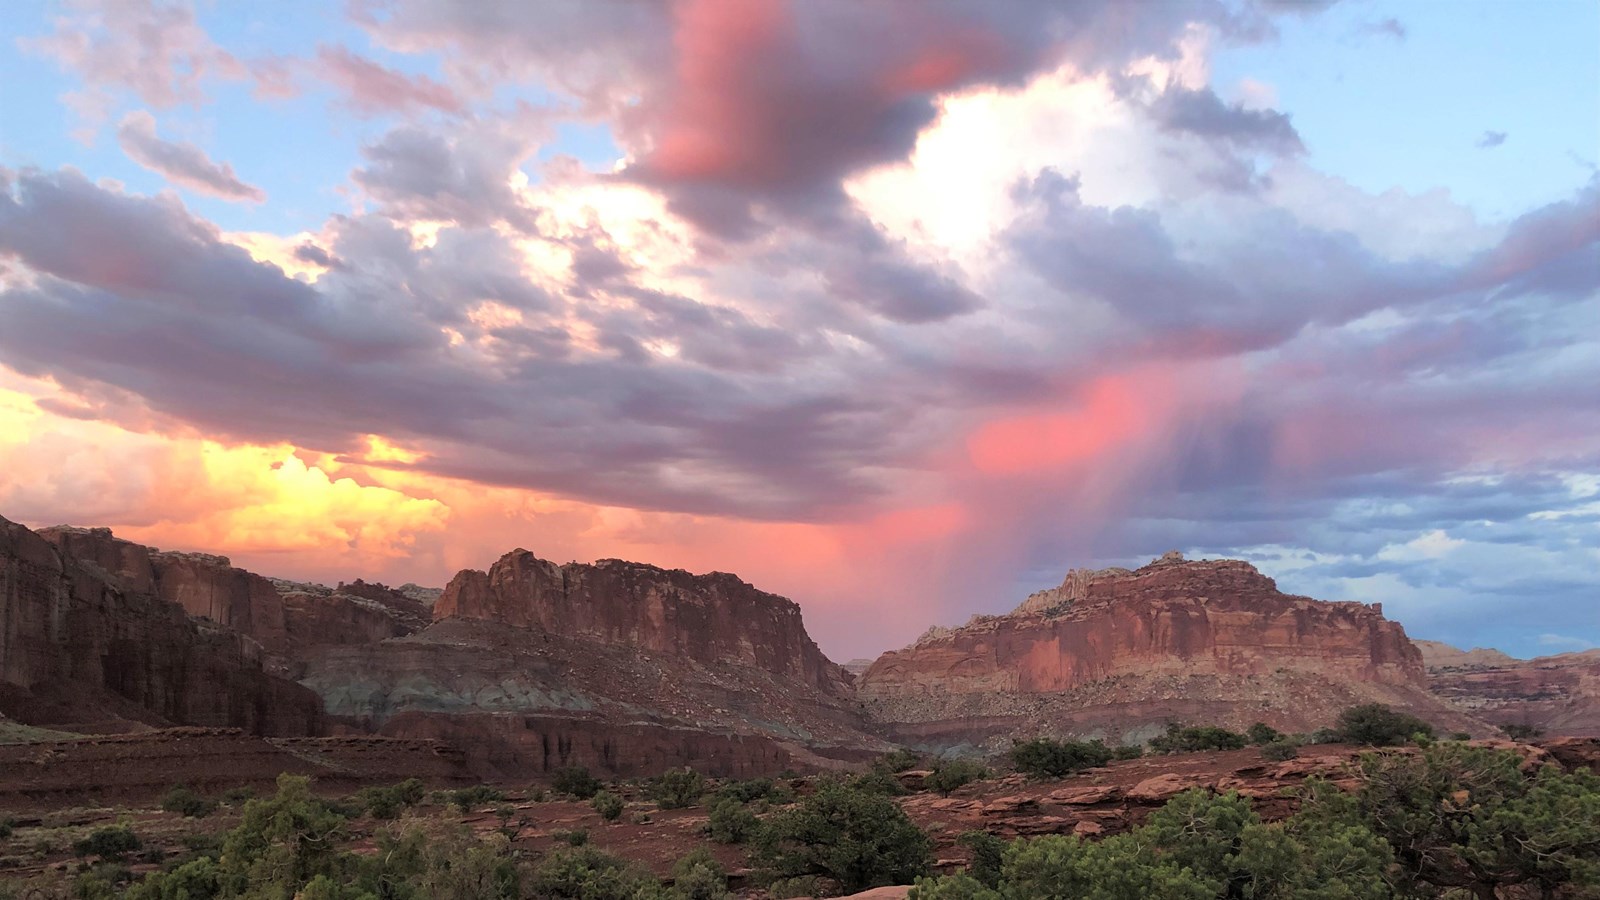 Juniper trees dot the foreground, with distant red-brown cliffs and colorful cloudy sky at sunset.